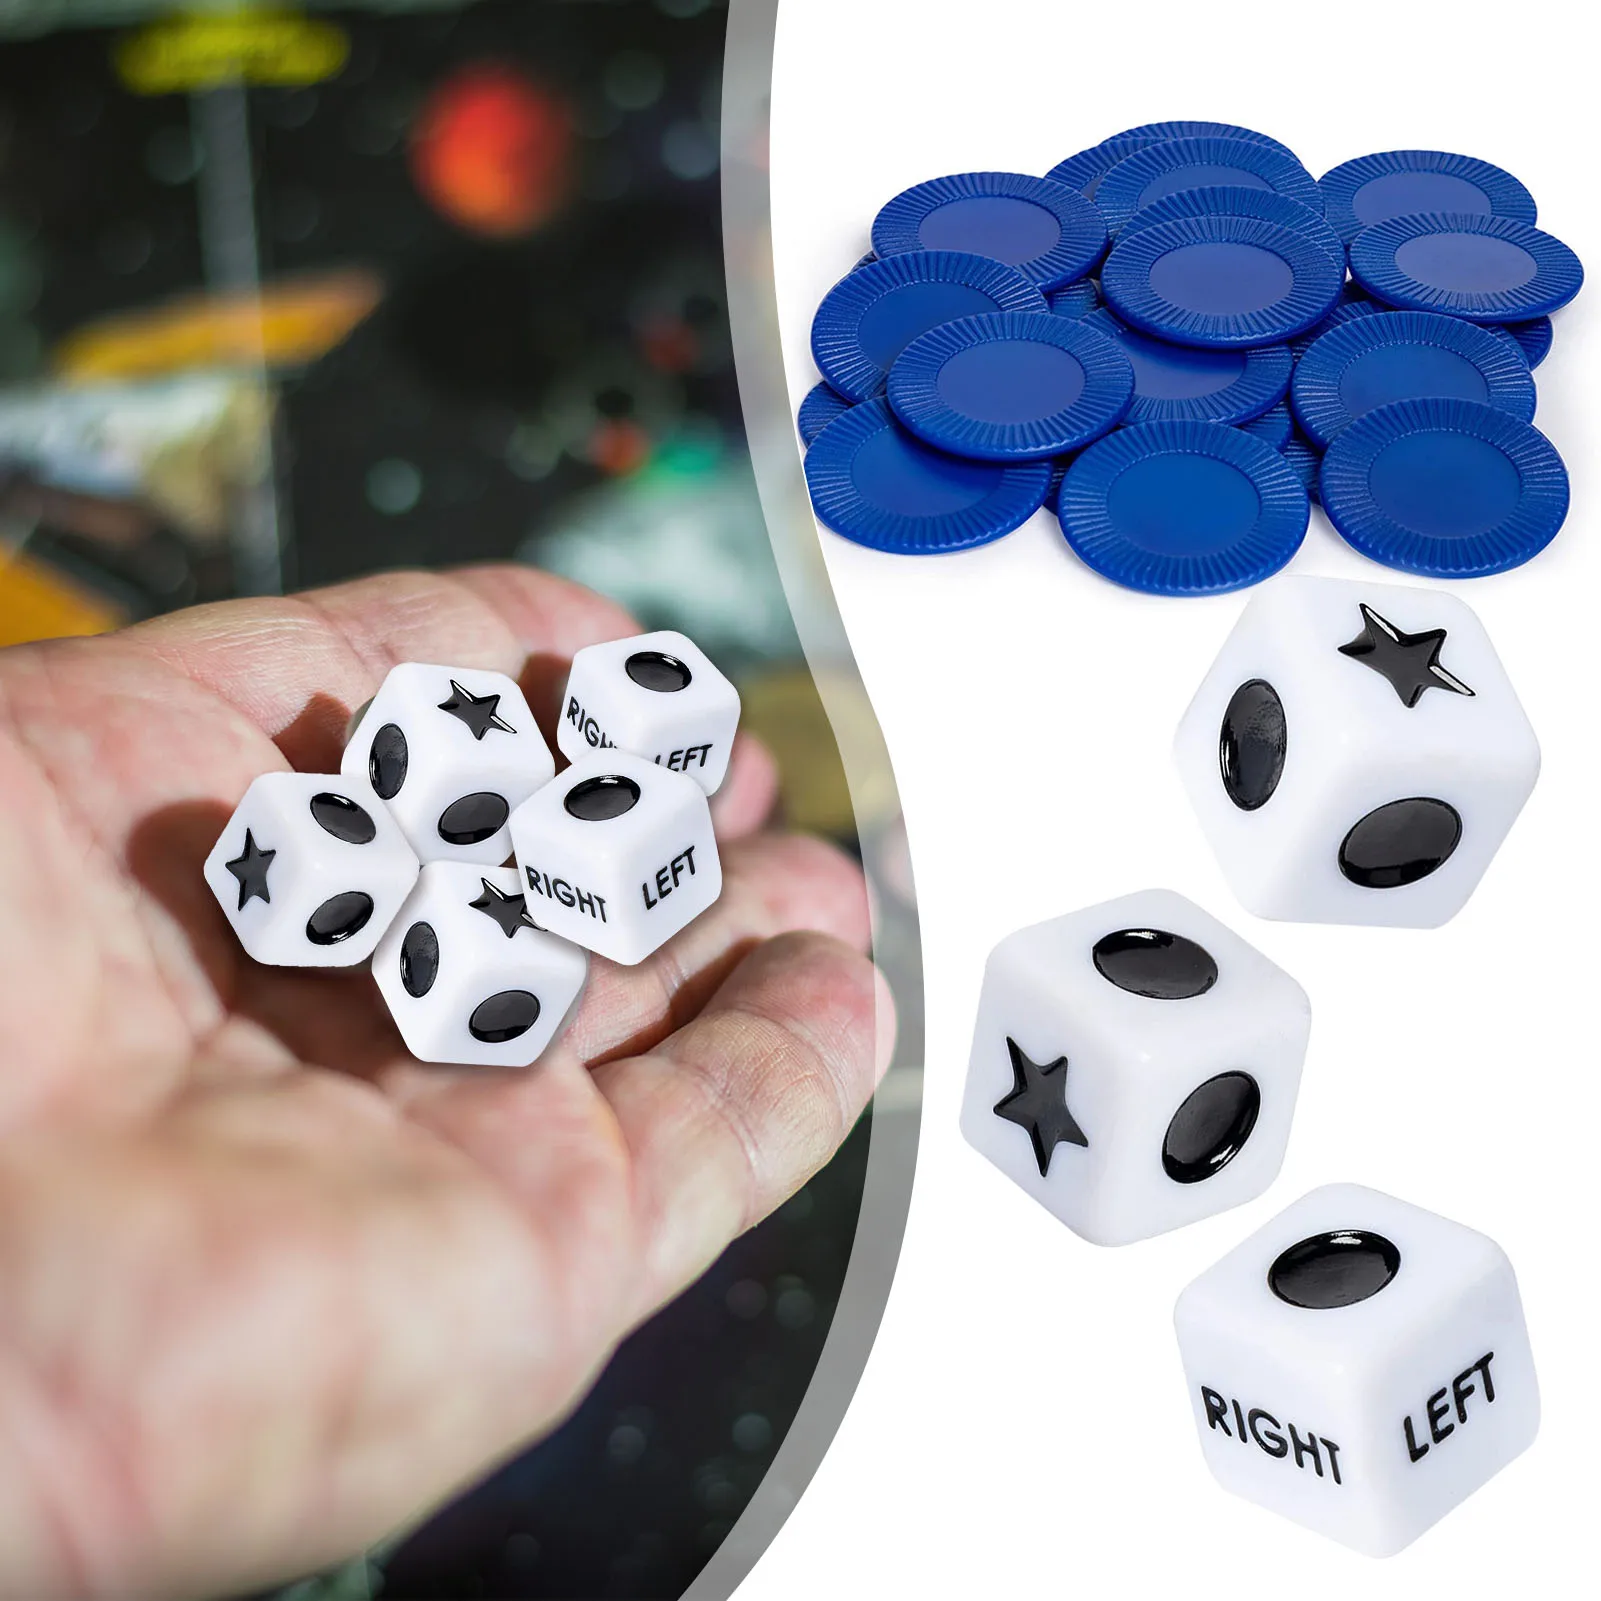 

Left Right Center Dice Game Interesting Right Left Center Game Dice With 3 Dices And 24 Chips For Club Drinking Games Gatherings